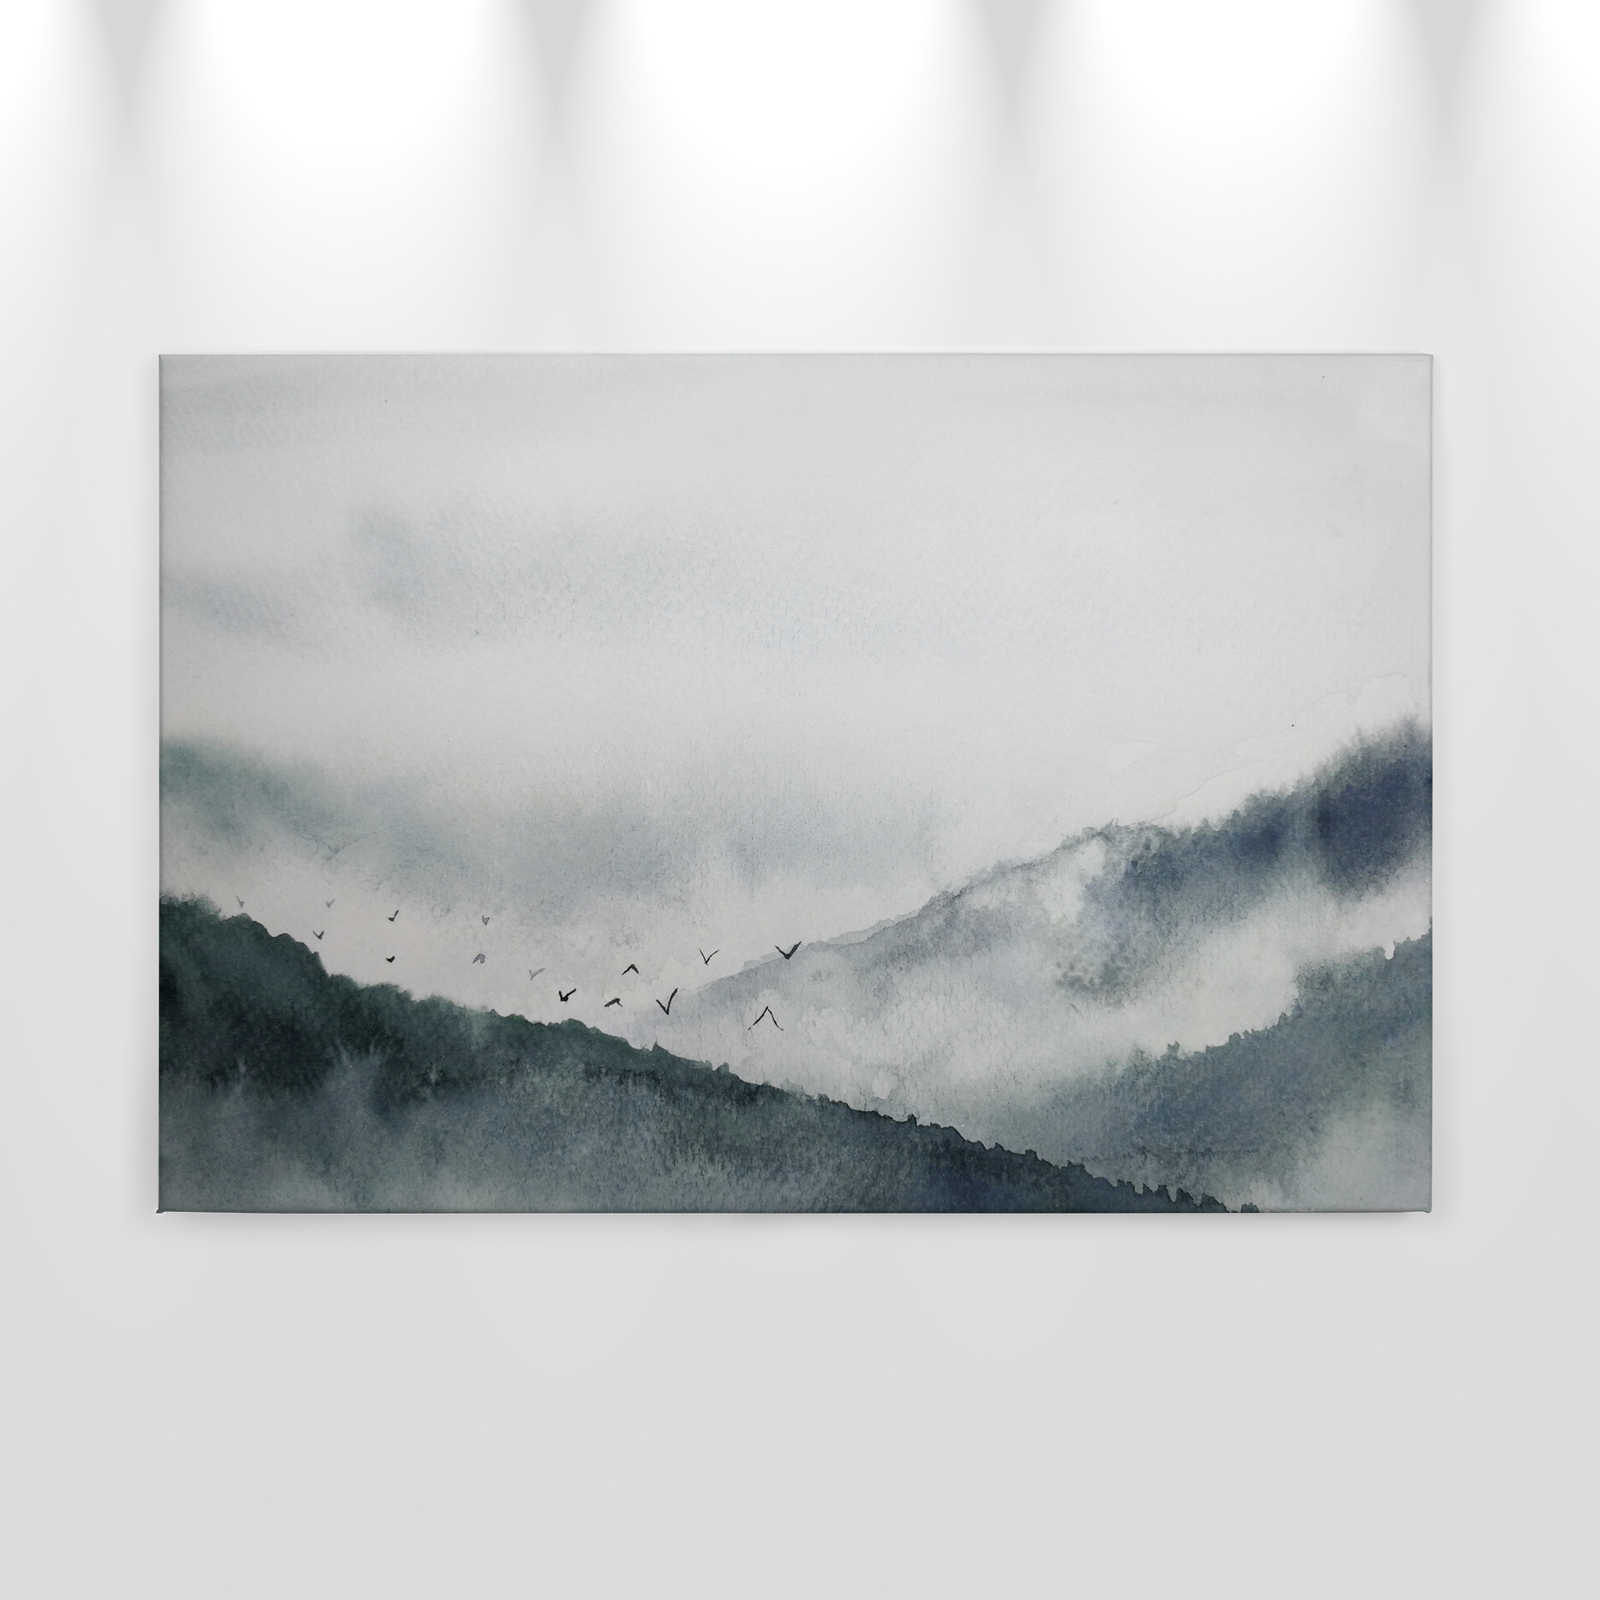             Canvas with foggy landscape in painting style | grey, black - 0.90 m x 0.60 m
        